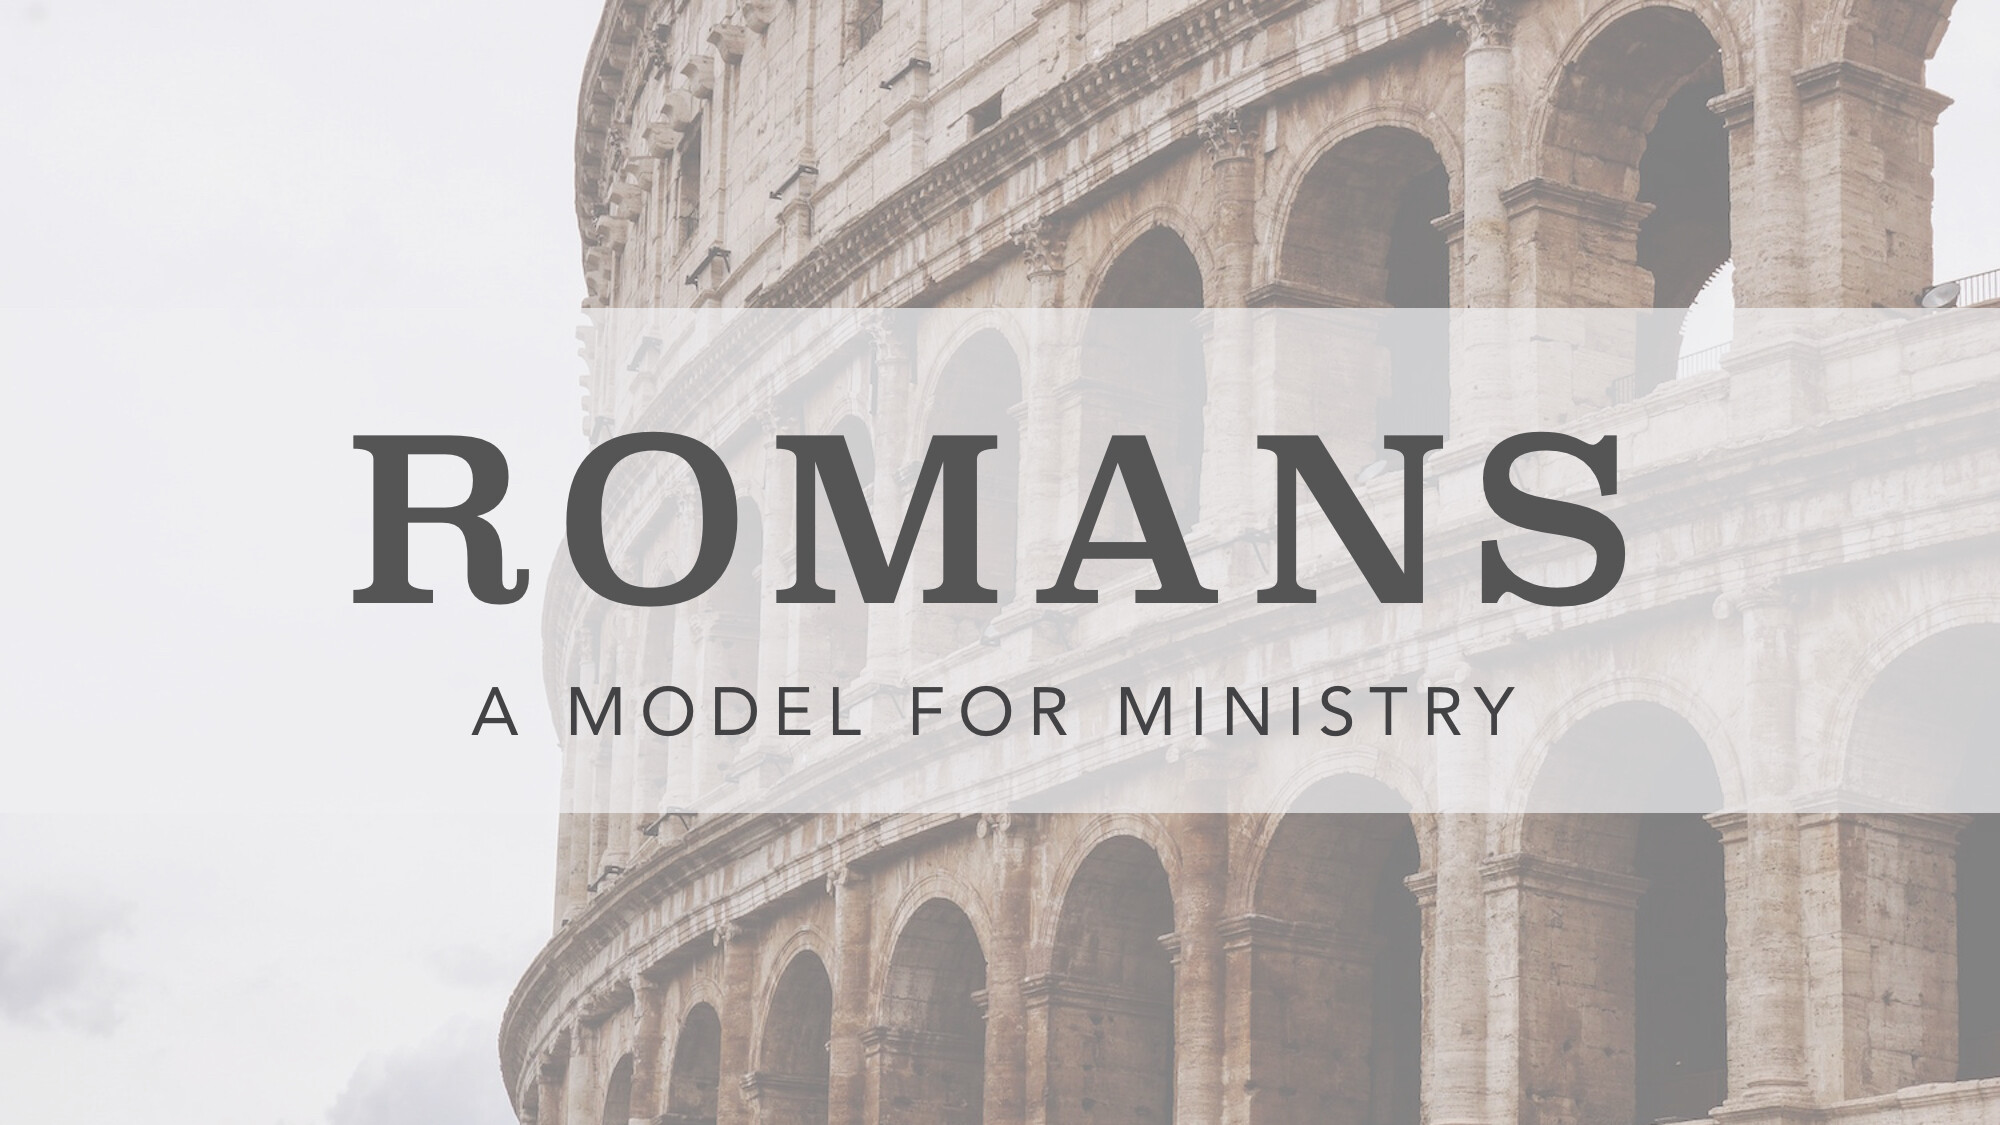 A Model for Ministry